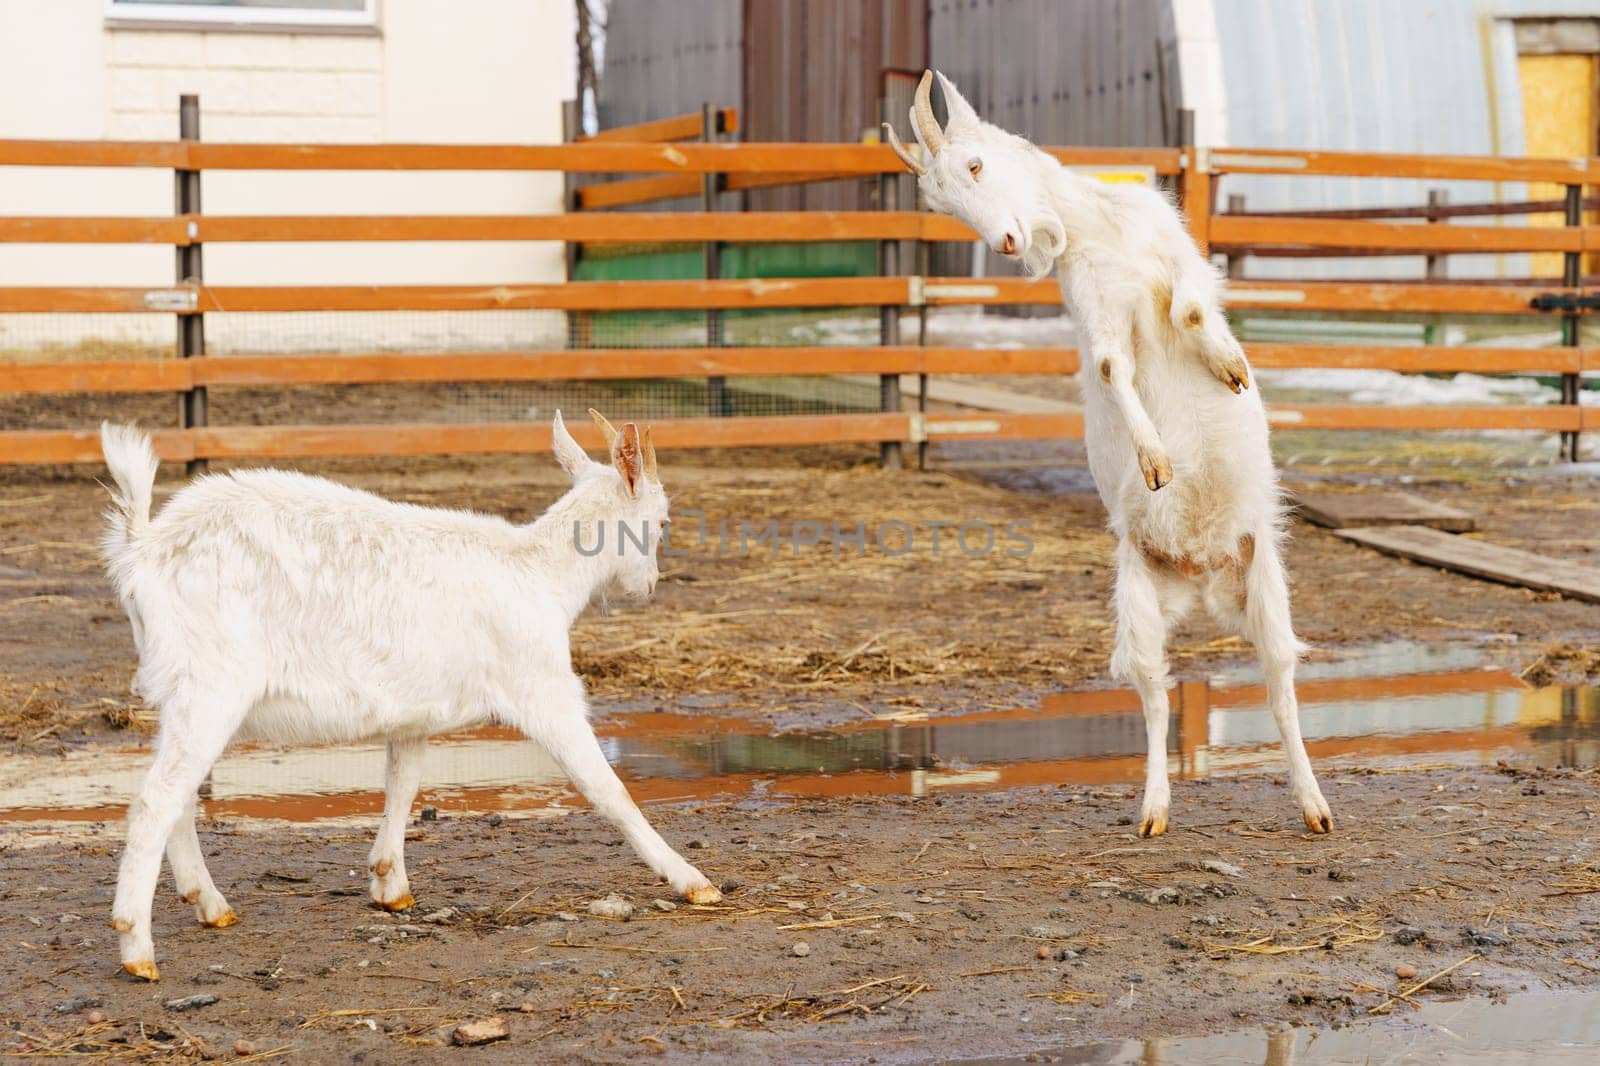 Goats on farm look peaceful and content in their enclosed environment. Selective focus. by darksoul72